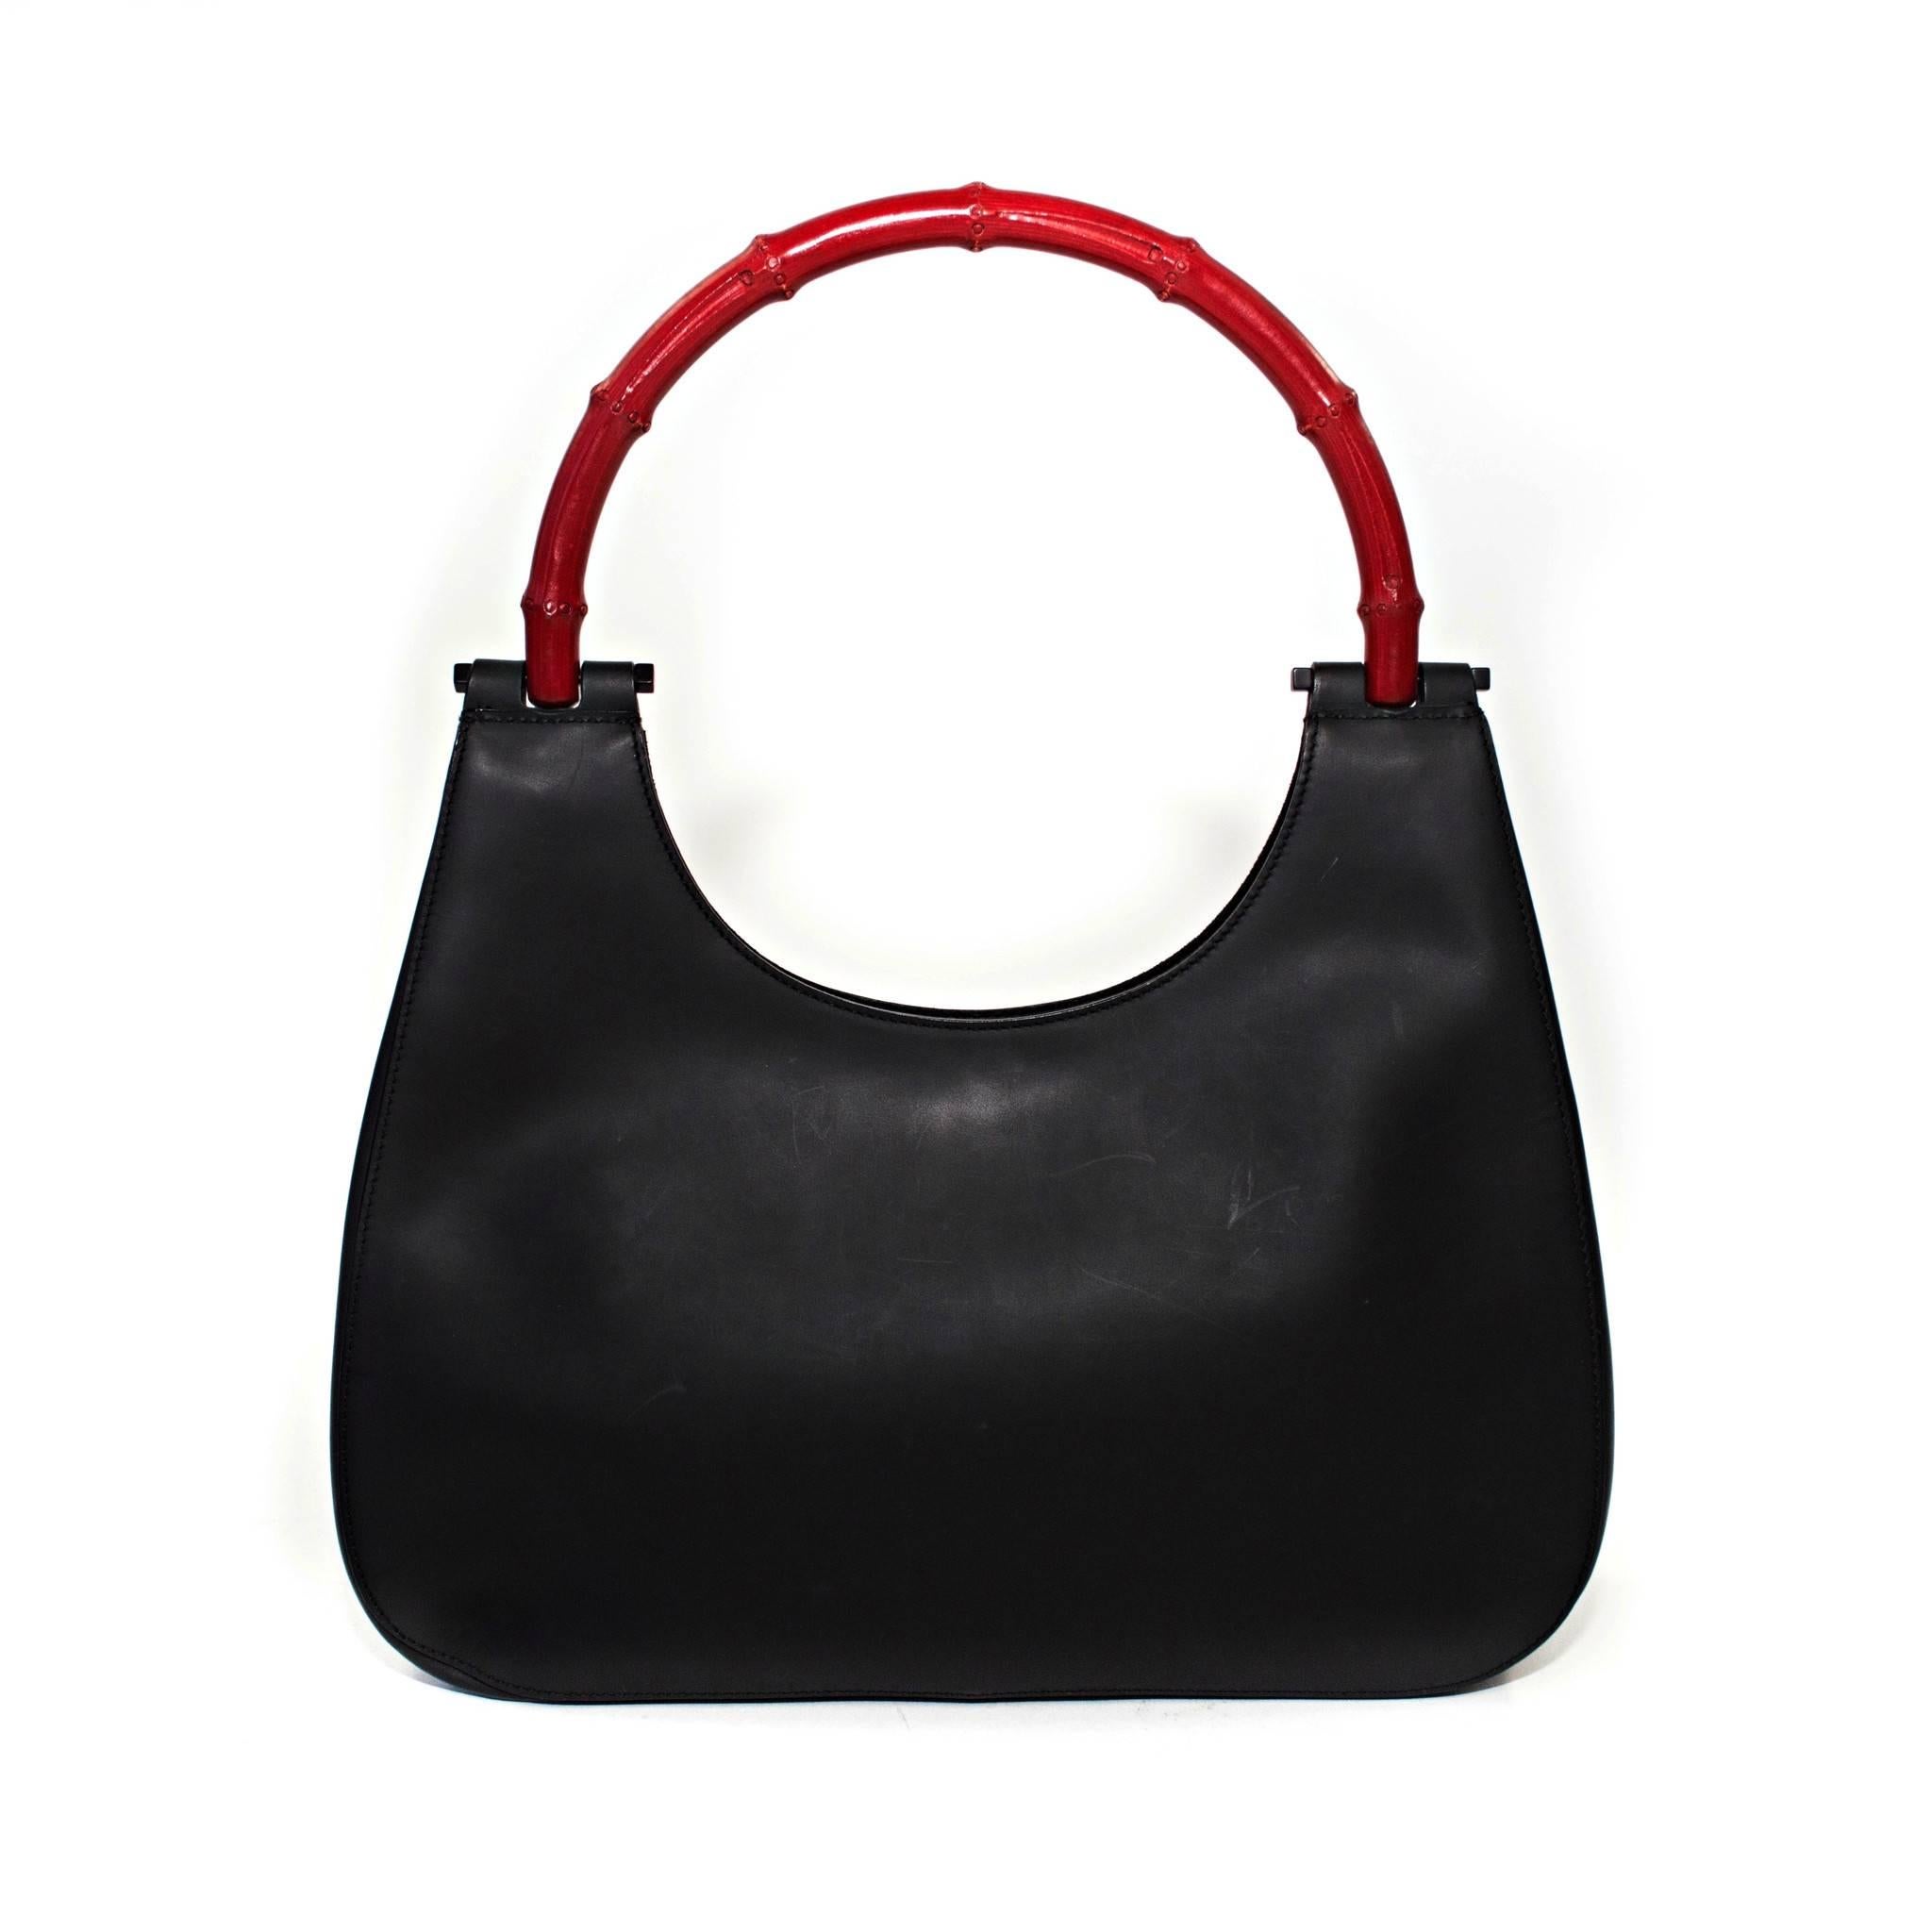 Gucci matte black Hobo style handbag with red bamboo handle.

Good Vintage Condition:Please remember all clothes are previously owned and gently worn unless otherwise noted.